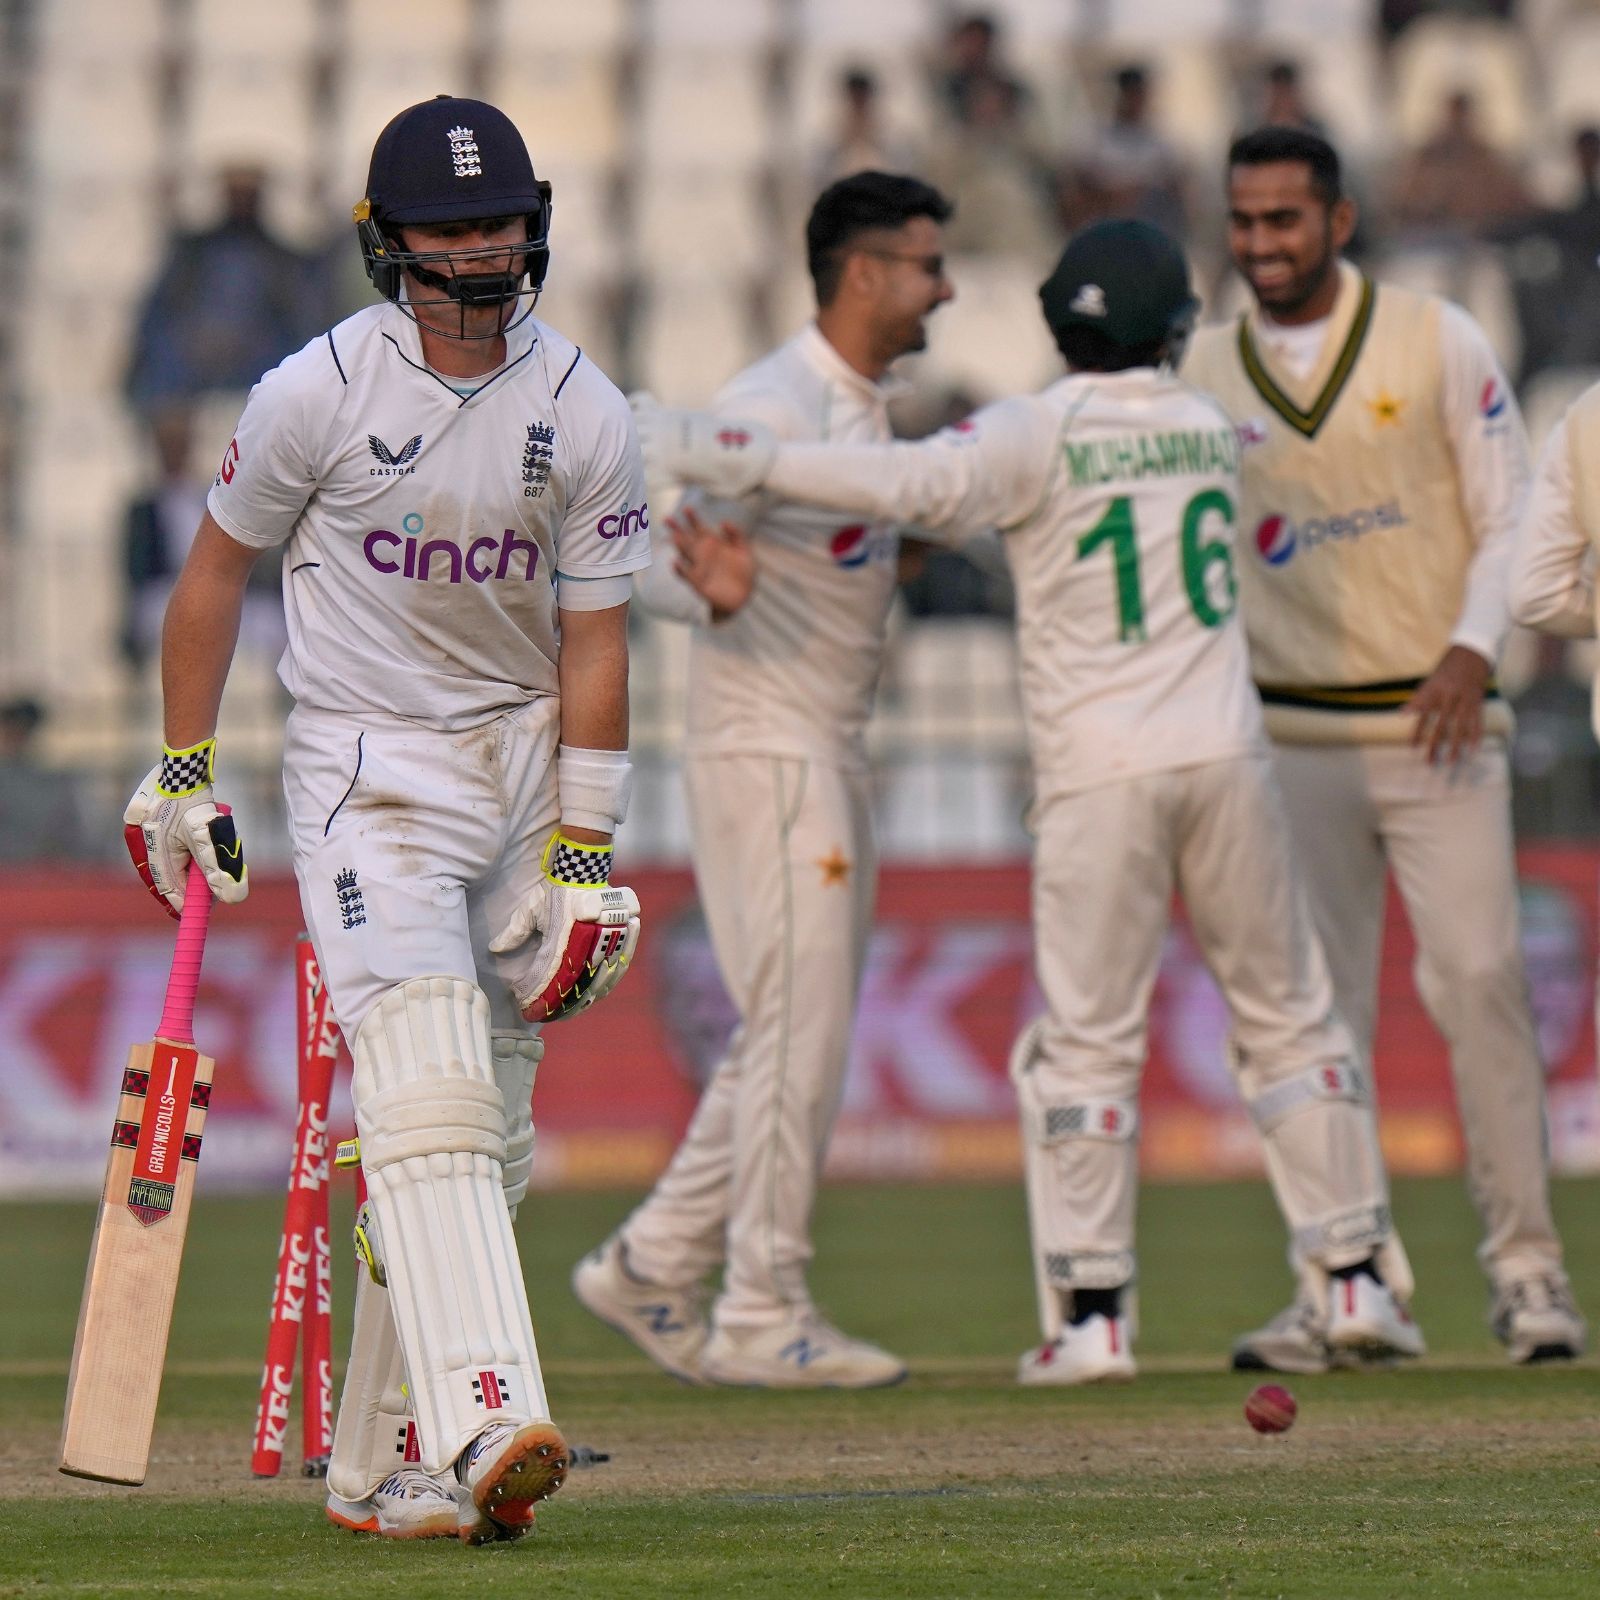 PAK vs ENG 2022 Live Score, 2nd Test, Day 3, Multan Cricket Stadium Live Scorecard and Ball-by-Ball Commentary